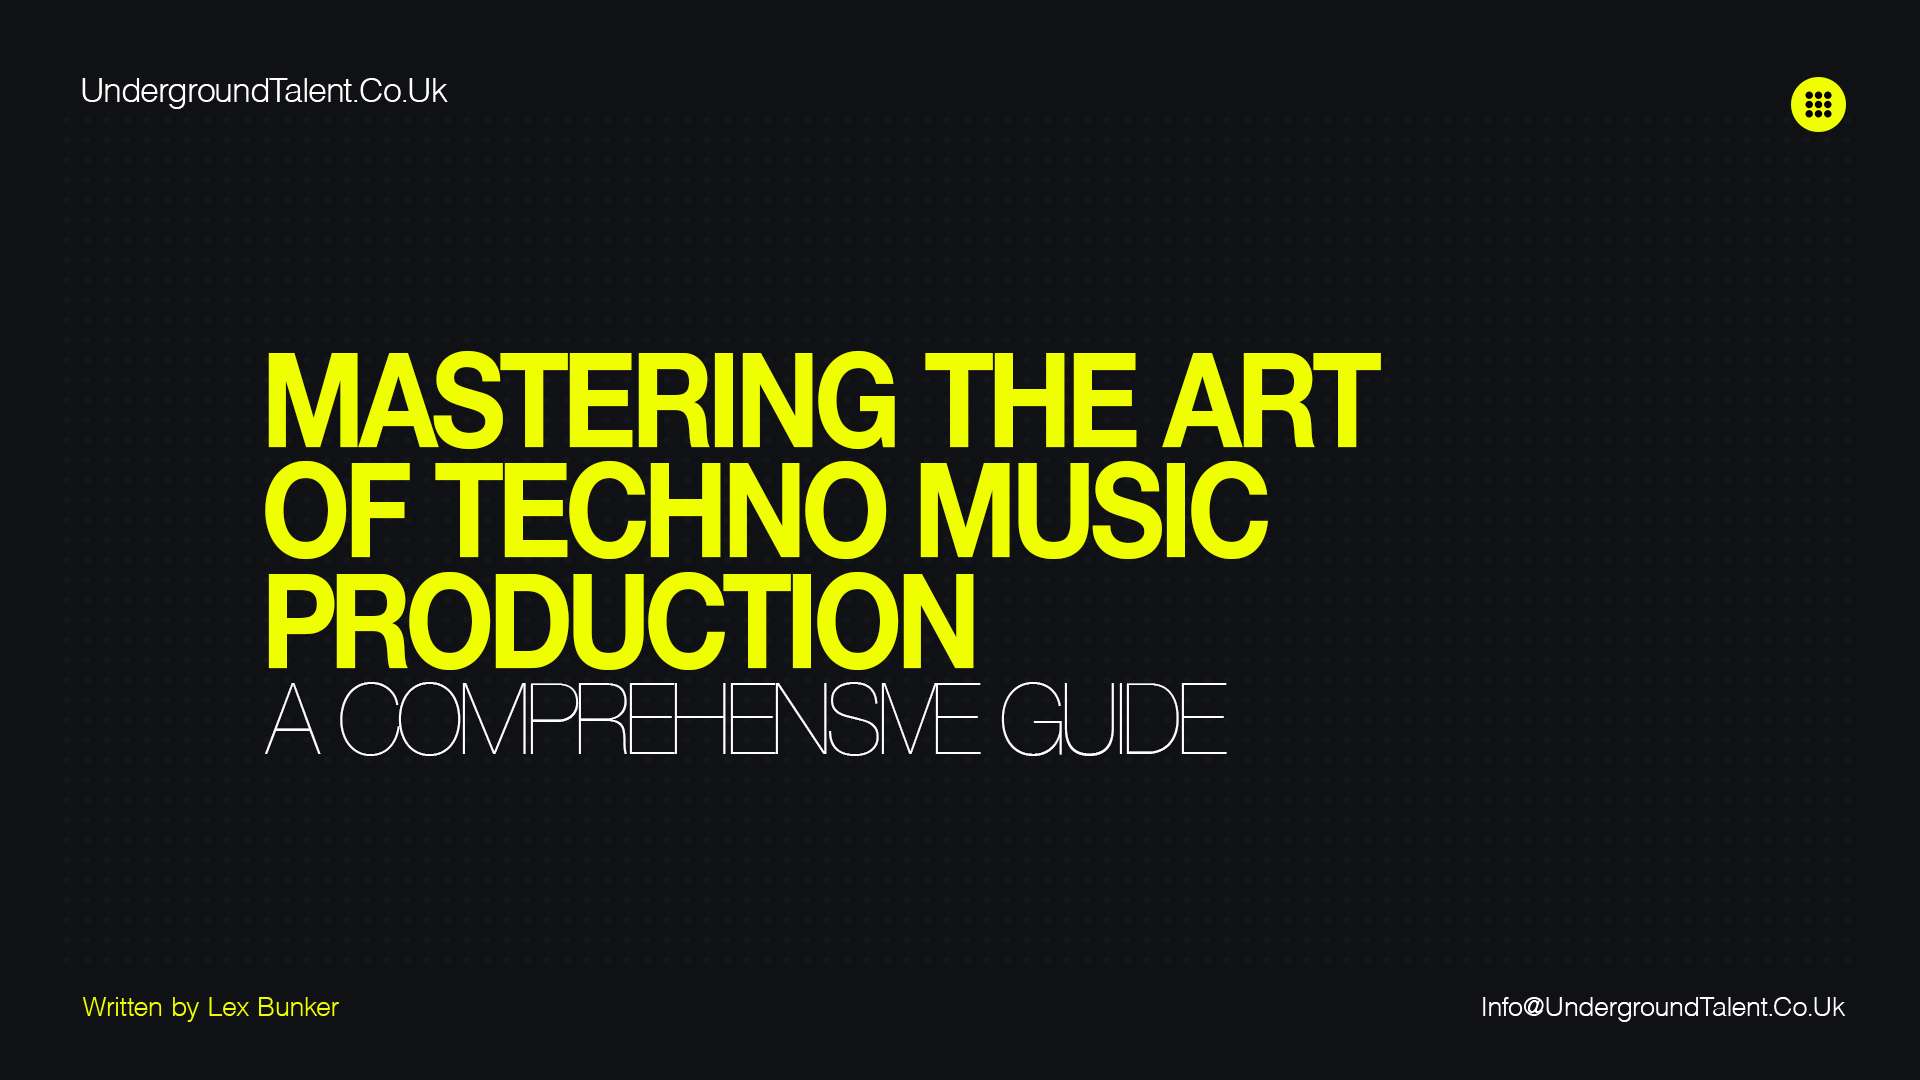 Techno Music Production: How to Master the Craft? (Guide)